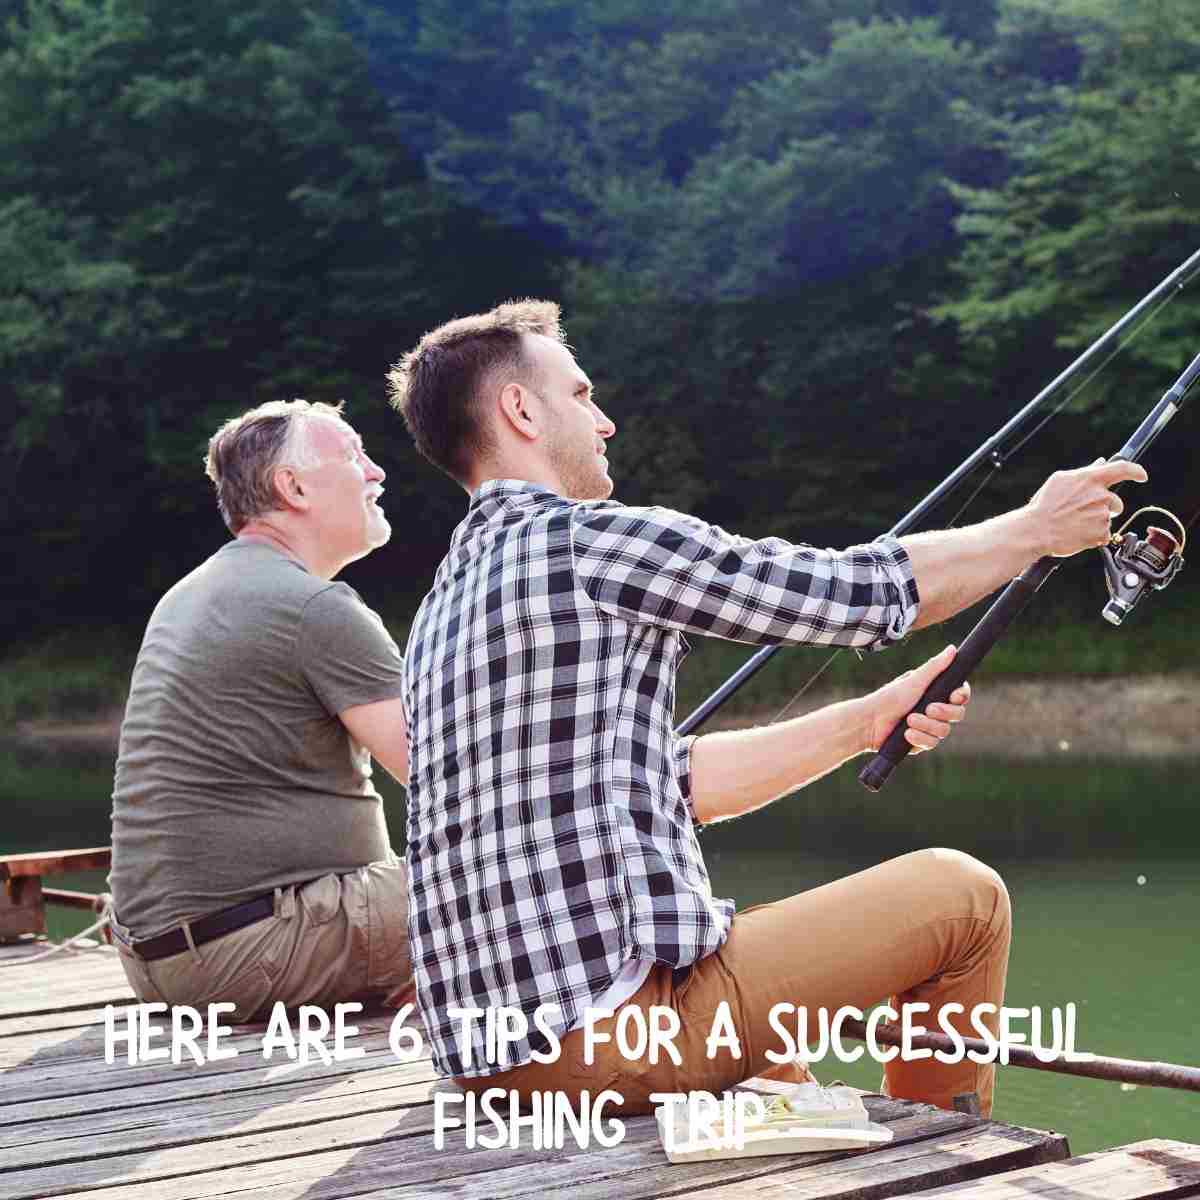 Tips for a Successful Fishing Trip